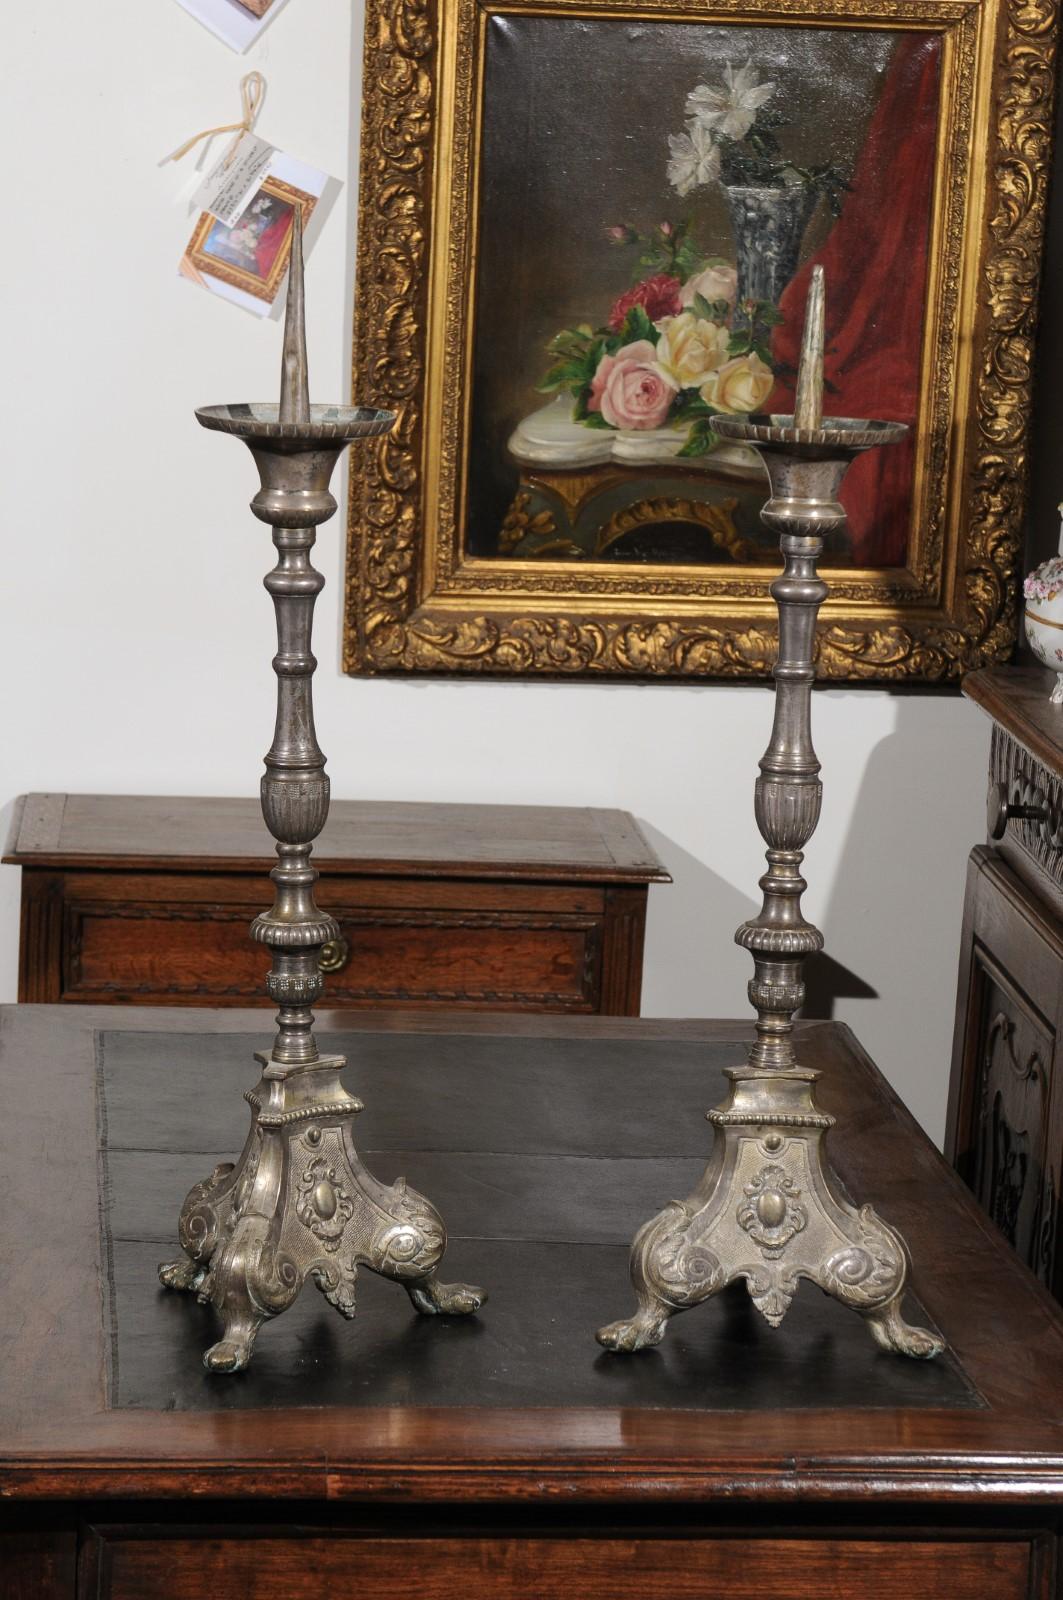 A pair of French Louis XV silvered bronze candlesticks from the 18th century, with volutes and paw feet. Born in France during the reign of King Louis XV nicknamed the Beloved, each of this pair of exquisite silvered bronze candlesticks features a